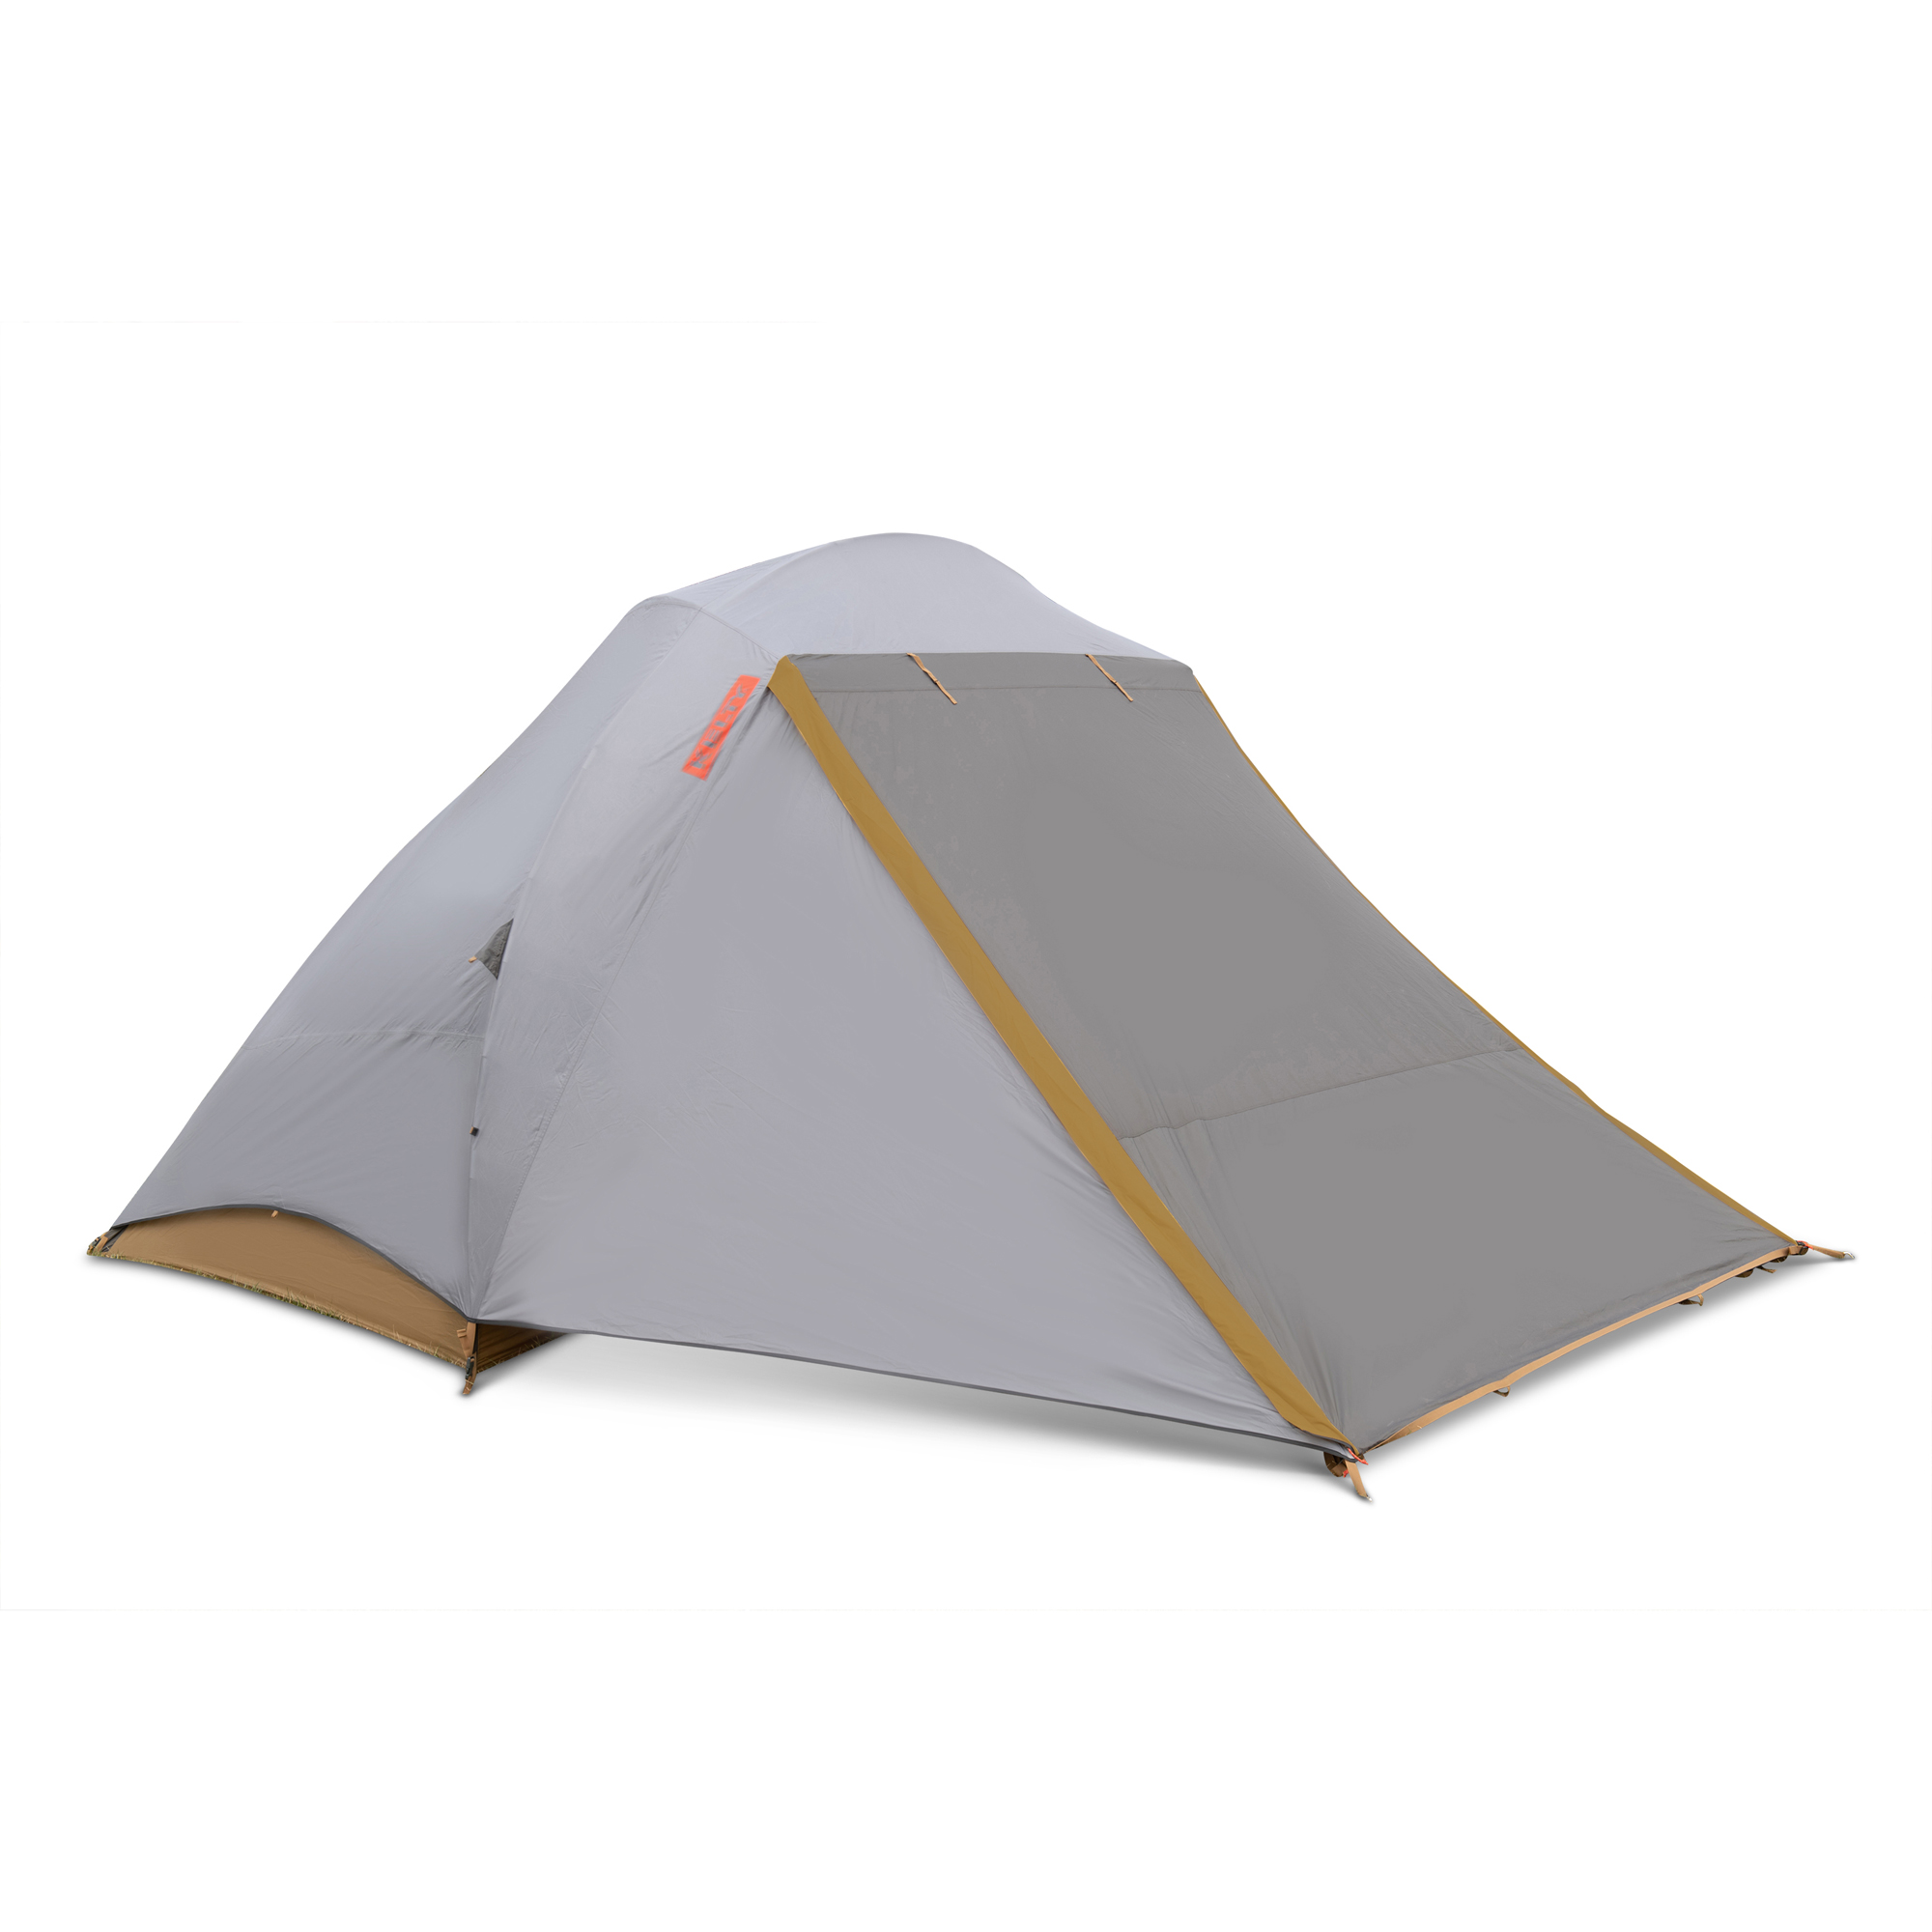 Kelty Caboose 4-Person Camping Tent